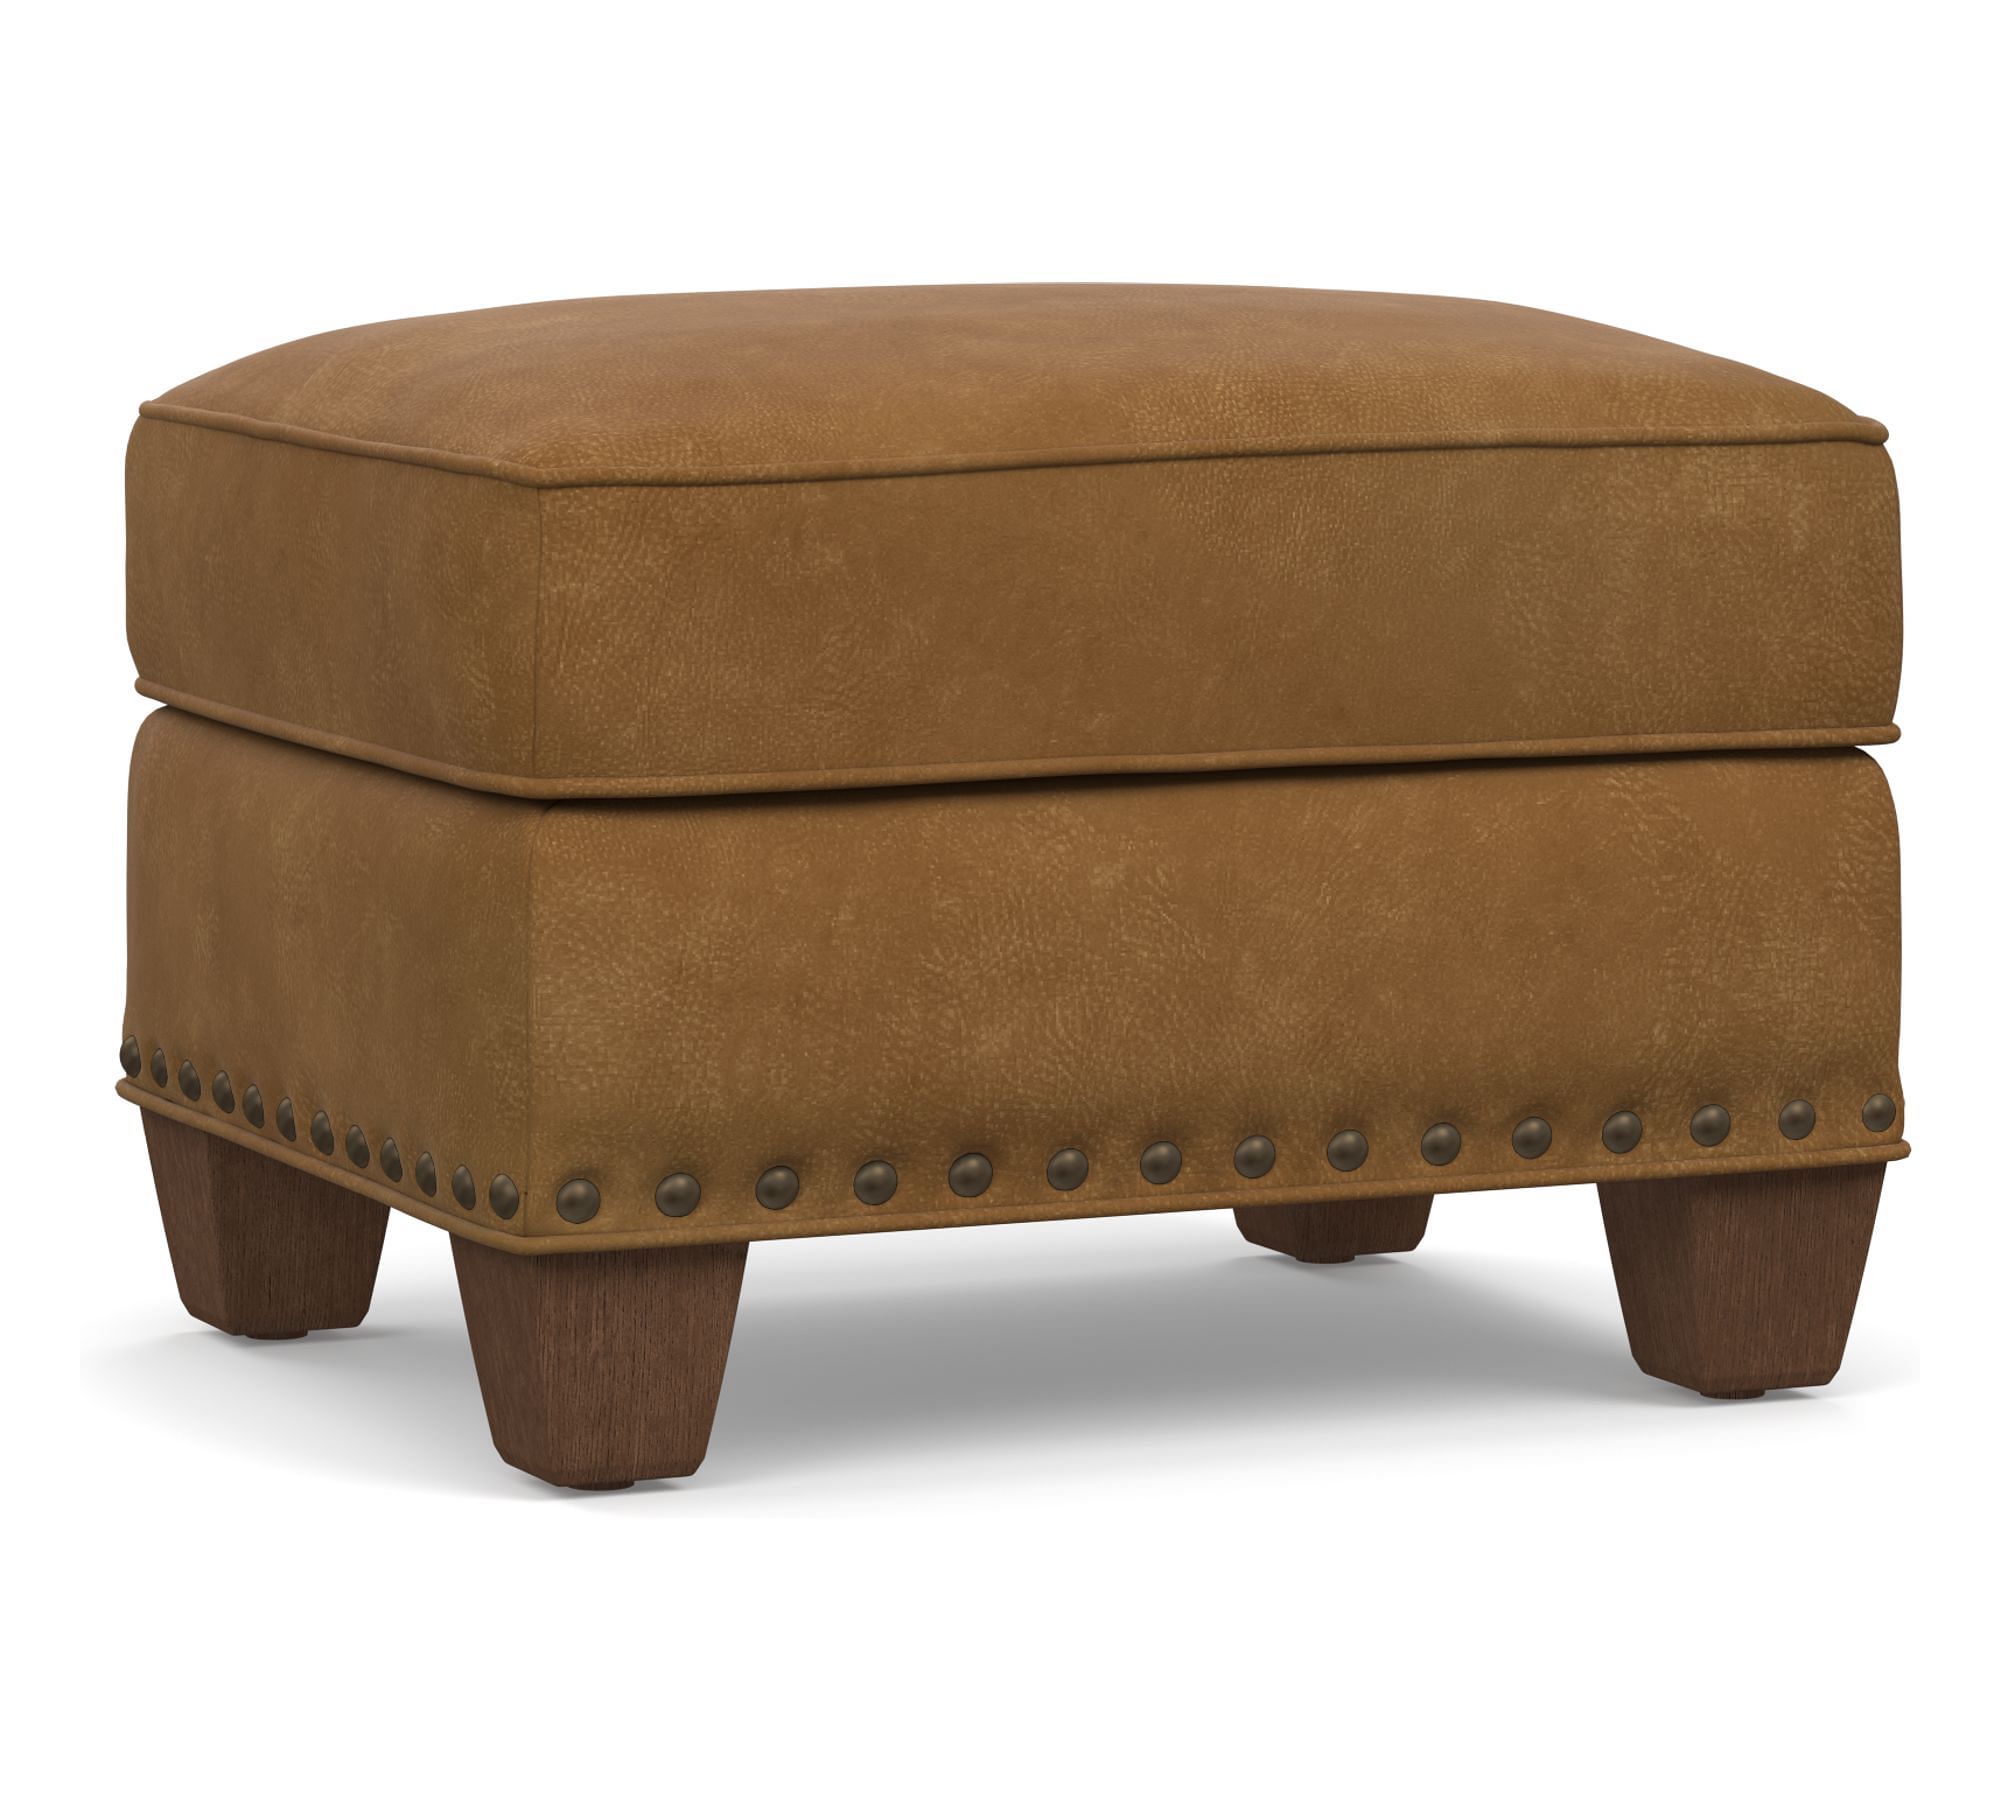 Irving Leather Storage Ottoman with Nailheads